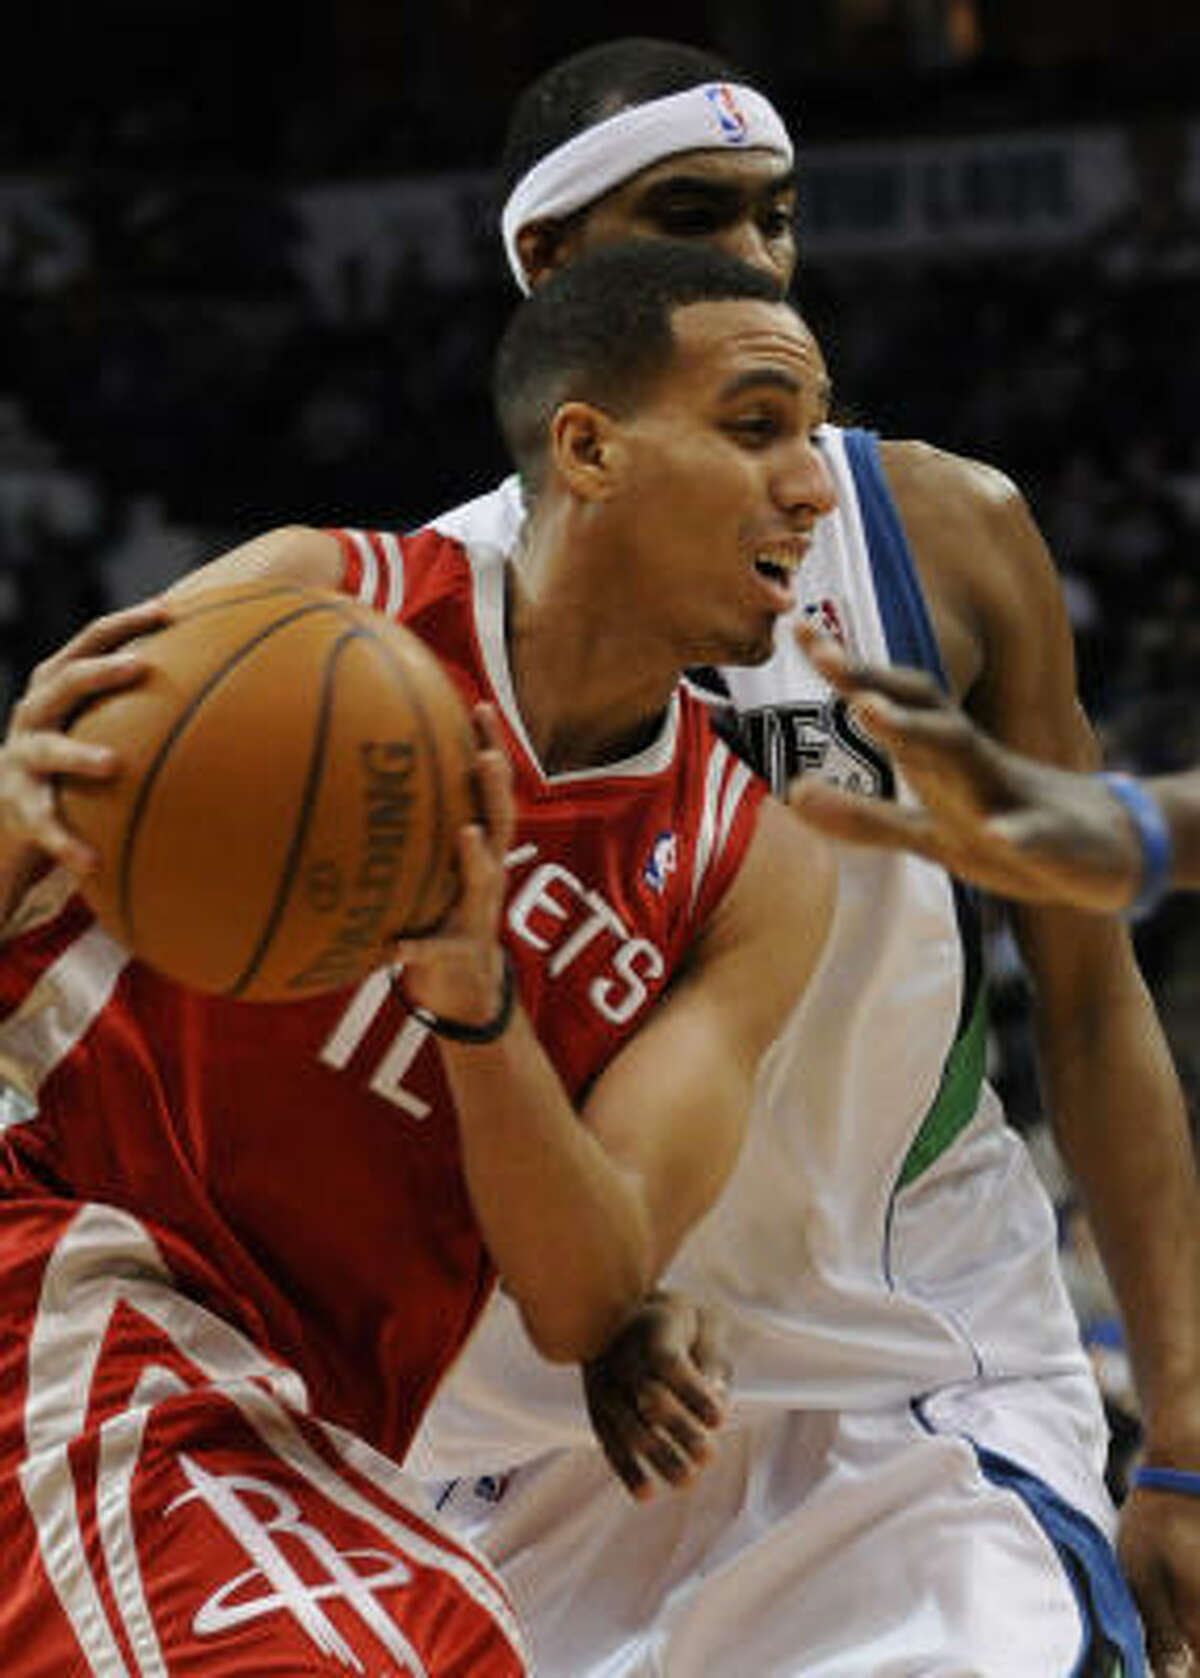 Kevin Martin, who finished with 30 points, drives past Timberwolves guard Corey Brewer.